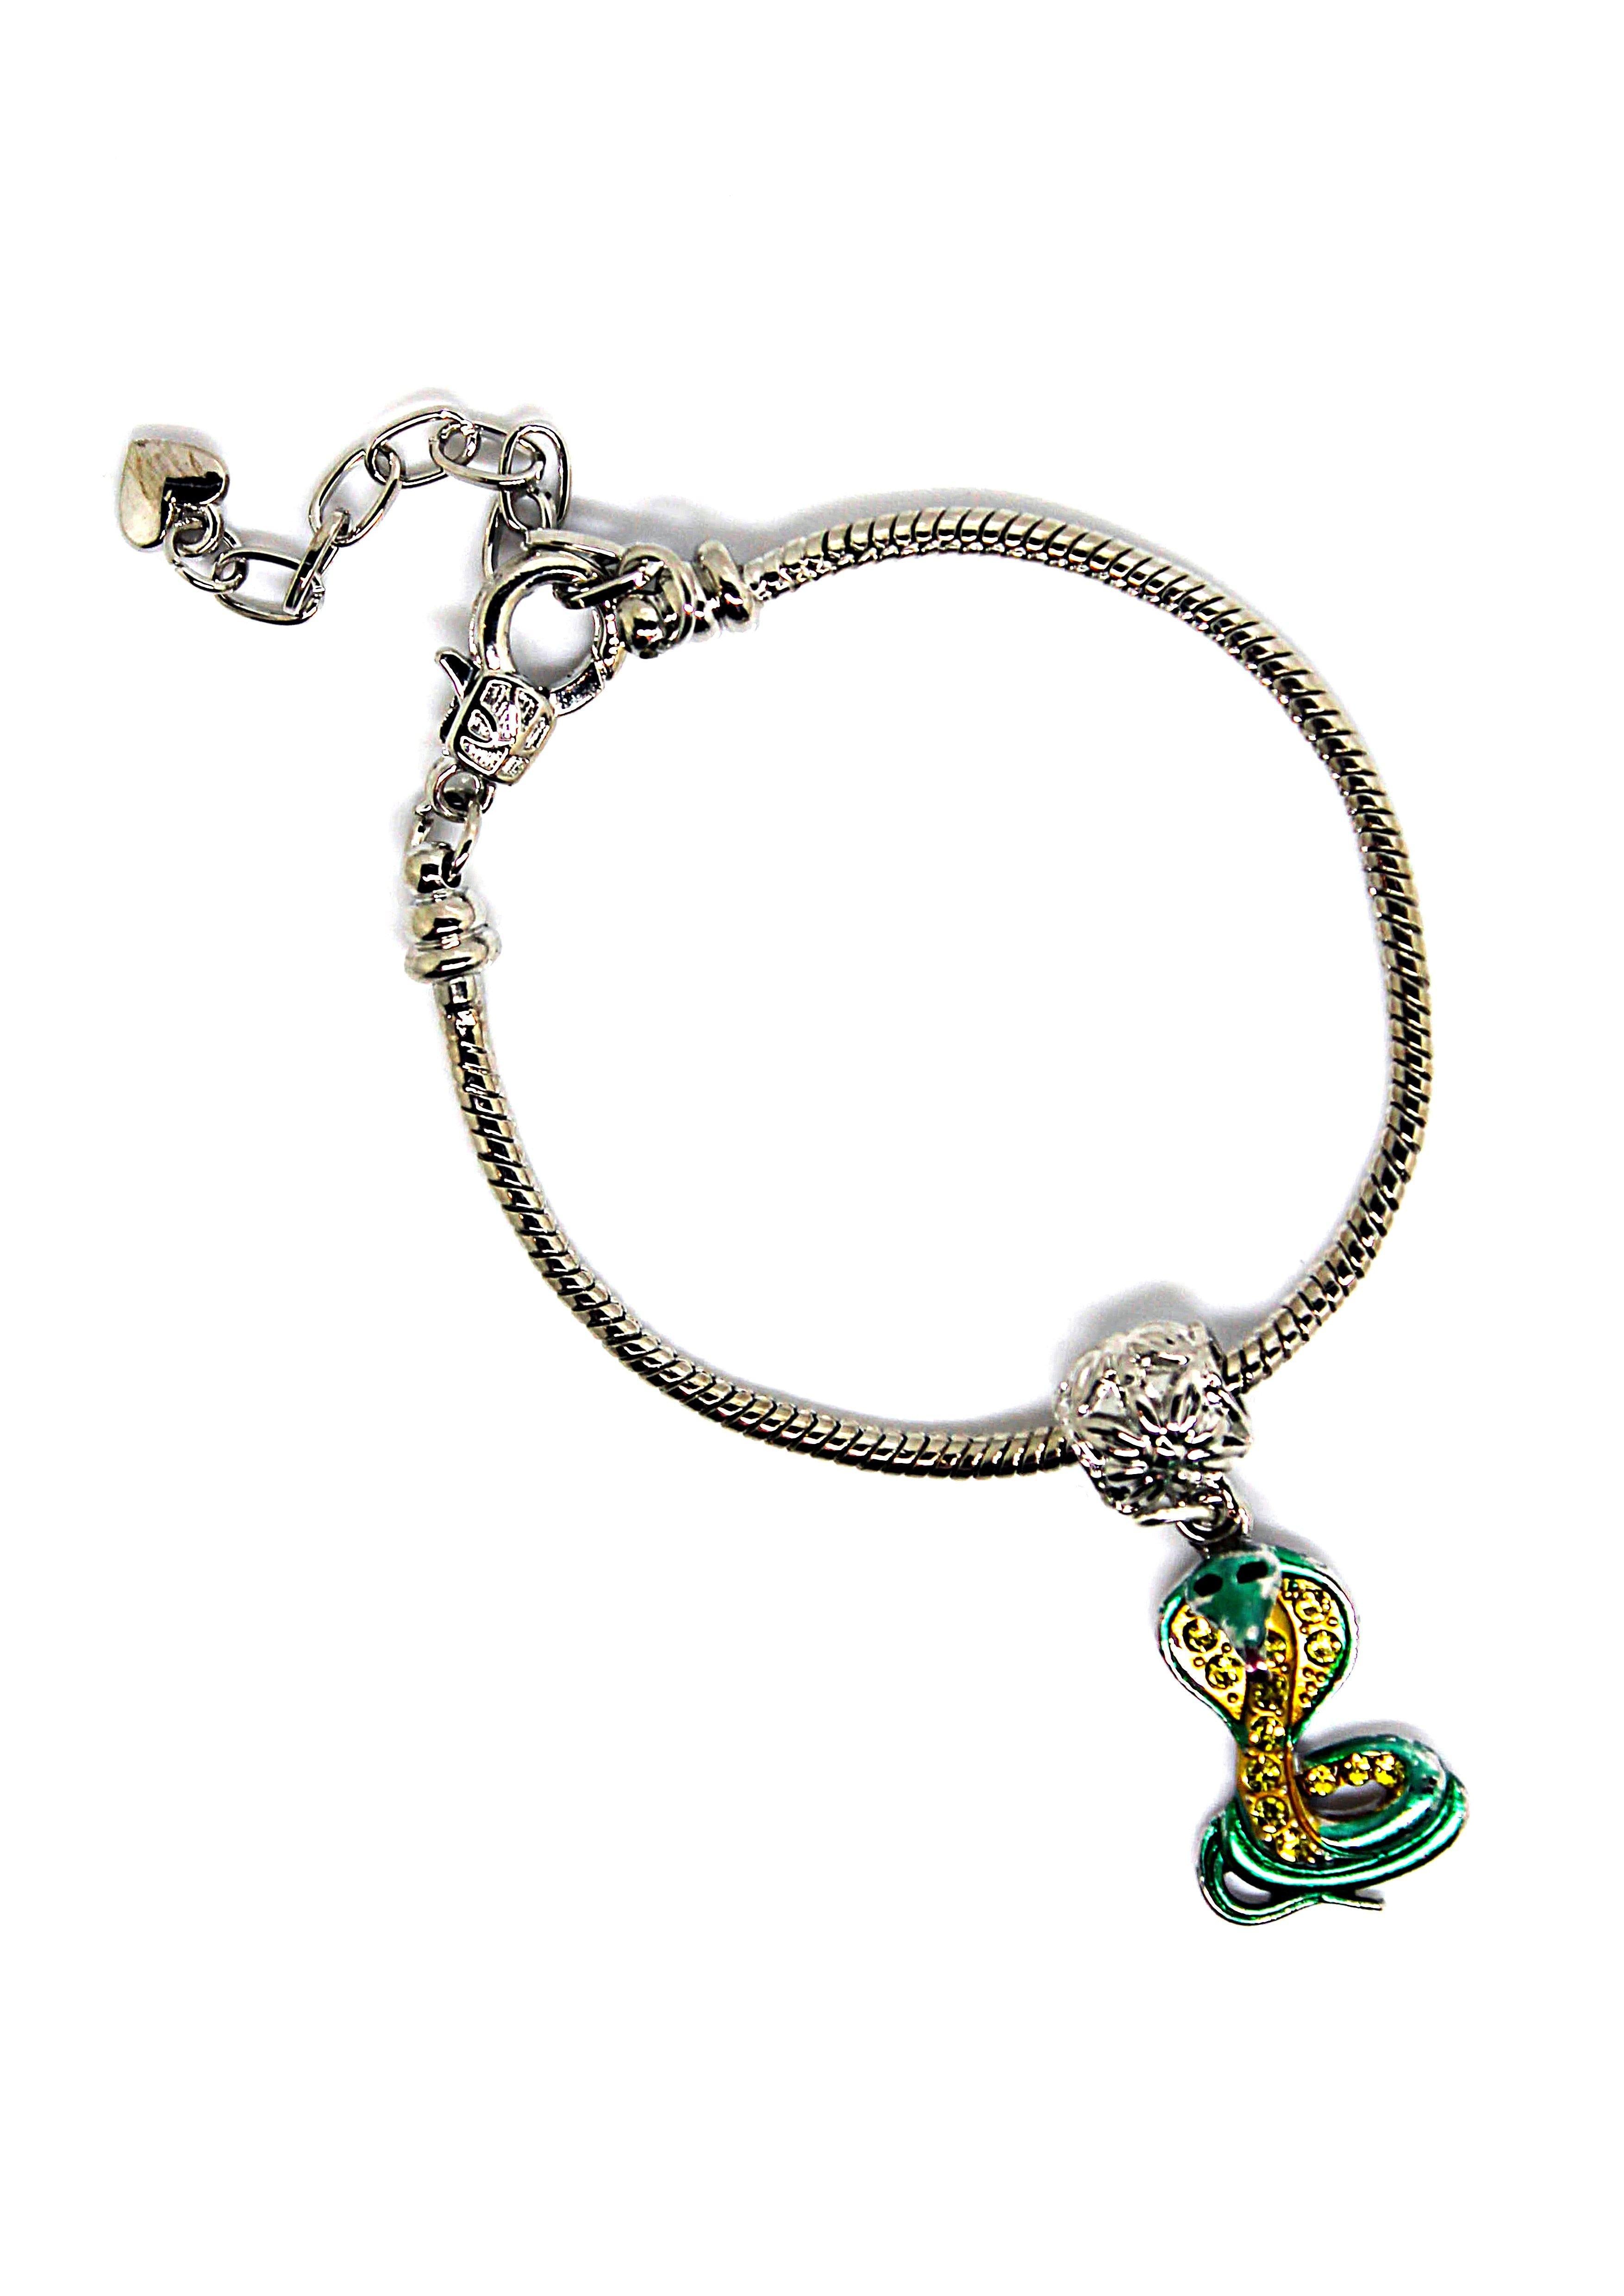 Snake Charm Bracelet - Wildtouch - Wildtouch